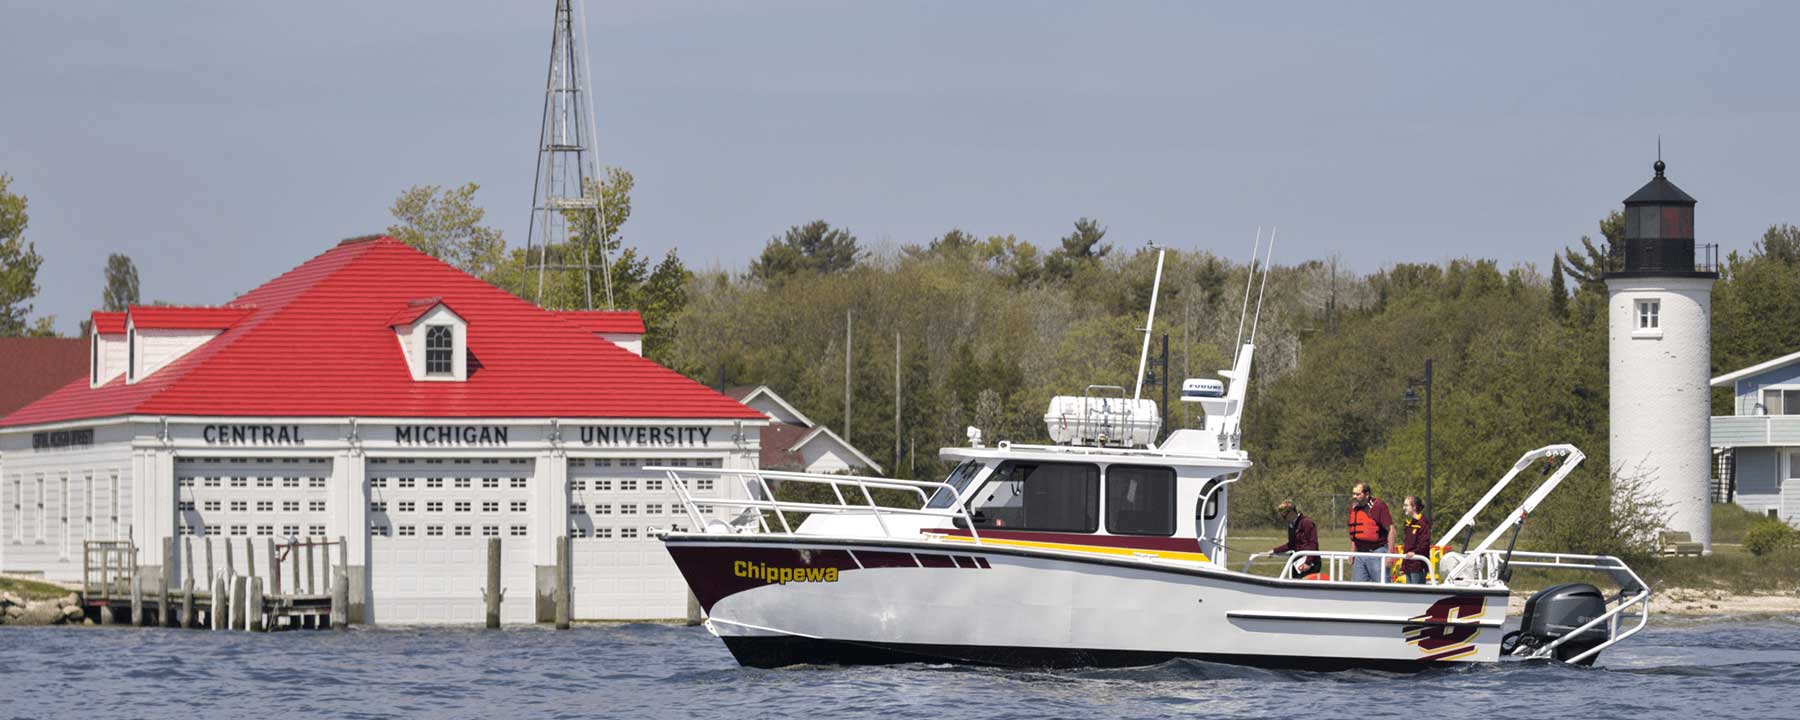 The MV Chippewa in the water in front of the CMU Boathouse